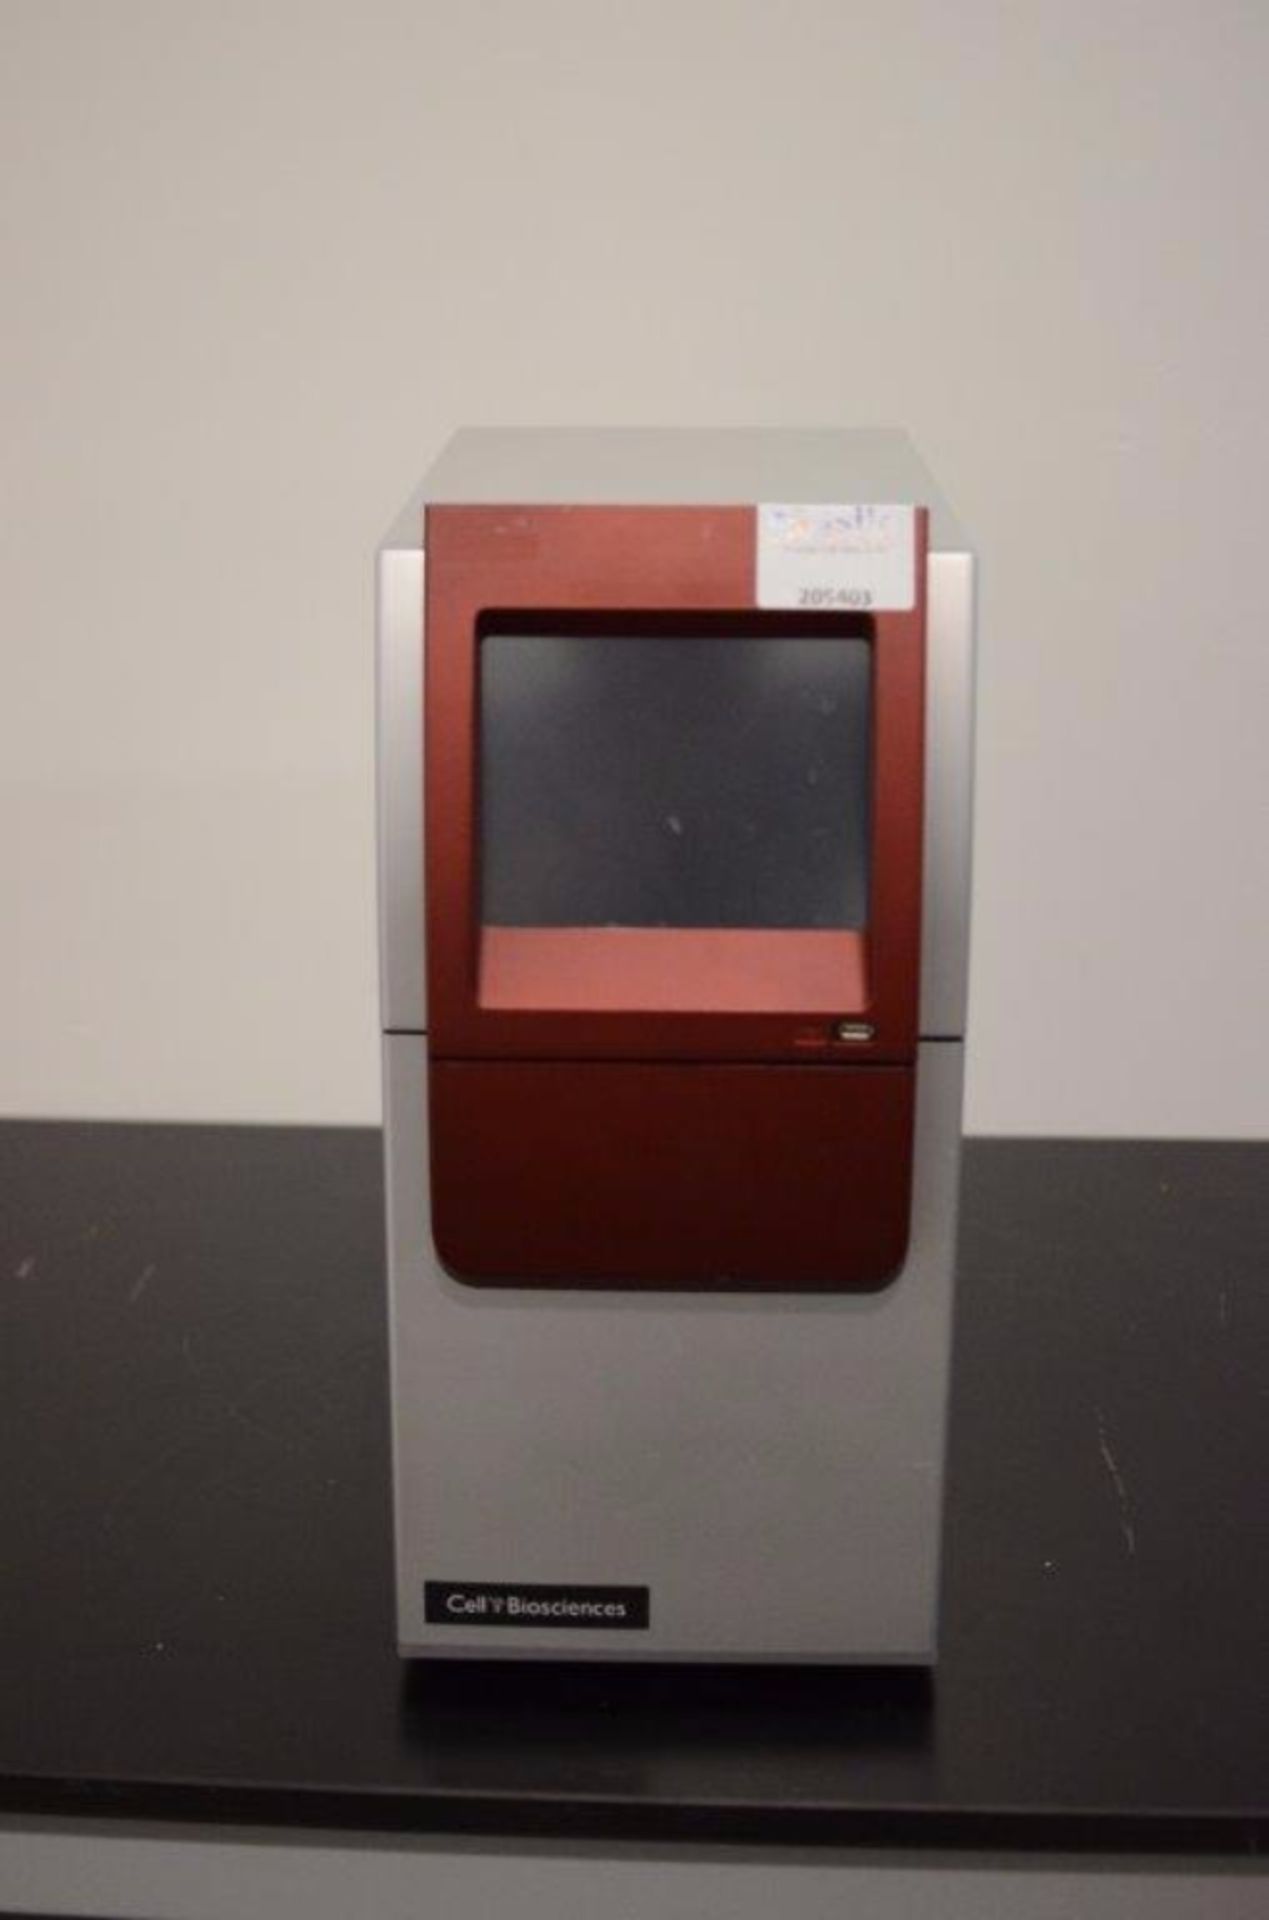 Protein Simple Cell Biosciences RED Gel Imaging System